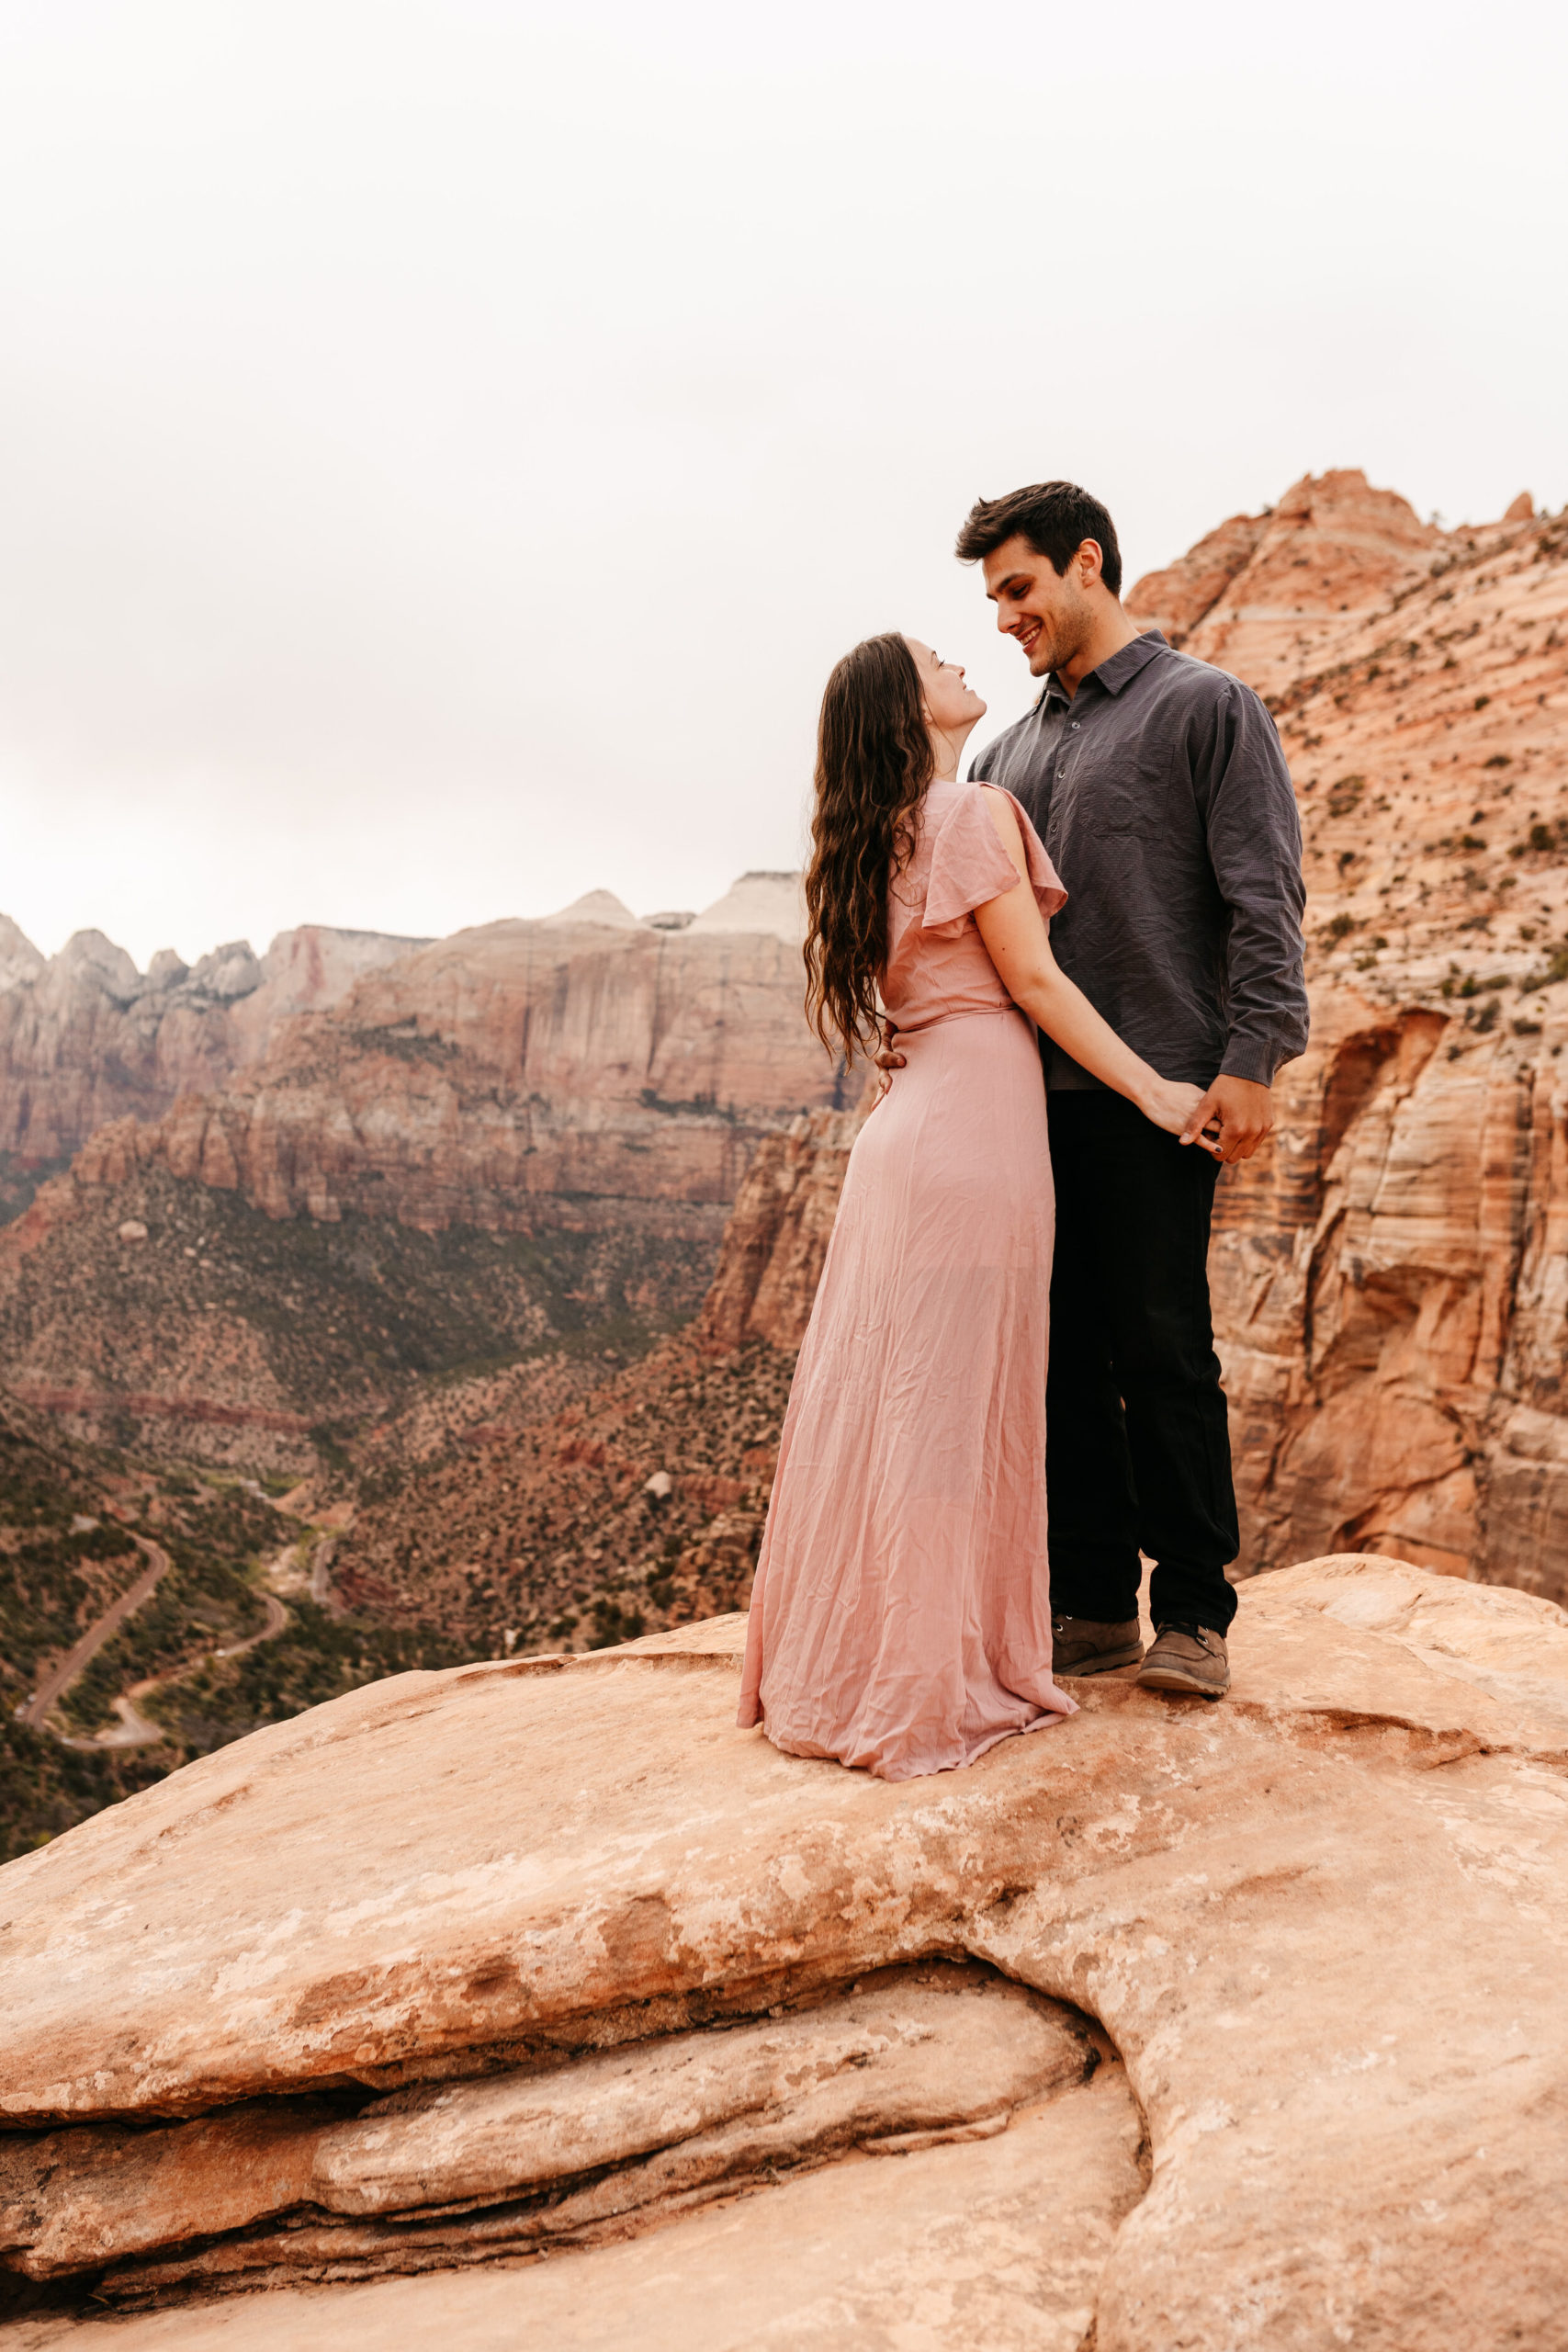 Kylee + Andrew - Zion National Park, Utah Canyon Overlook Adventure Session31.jpg